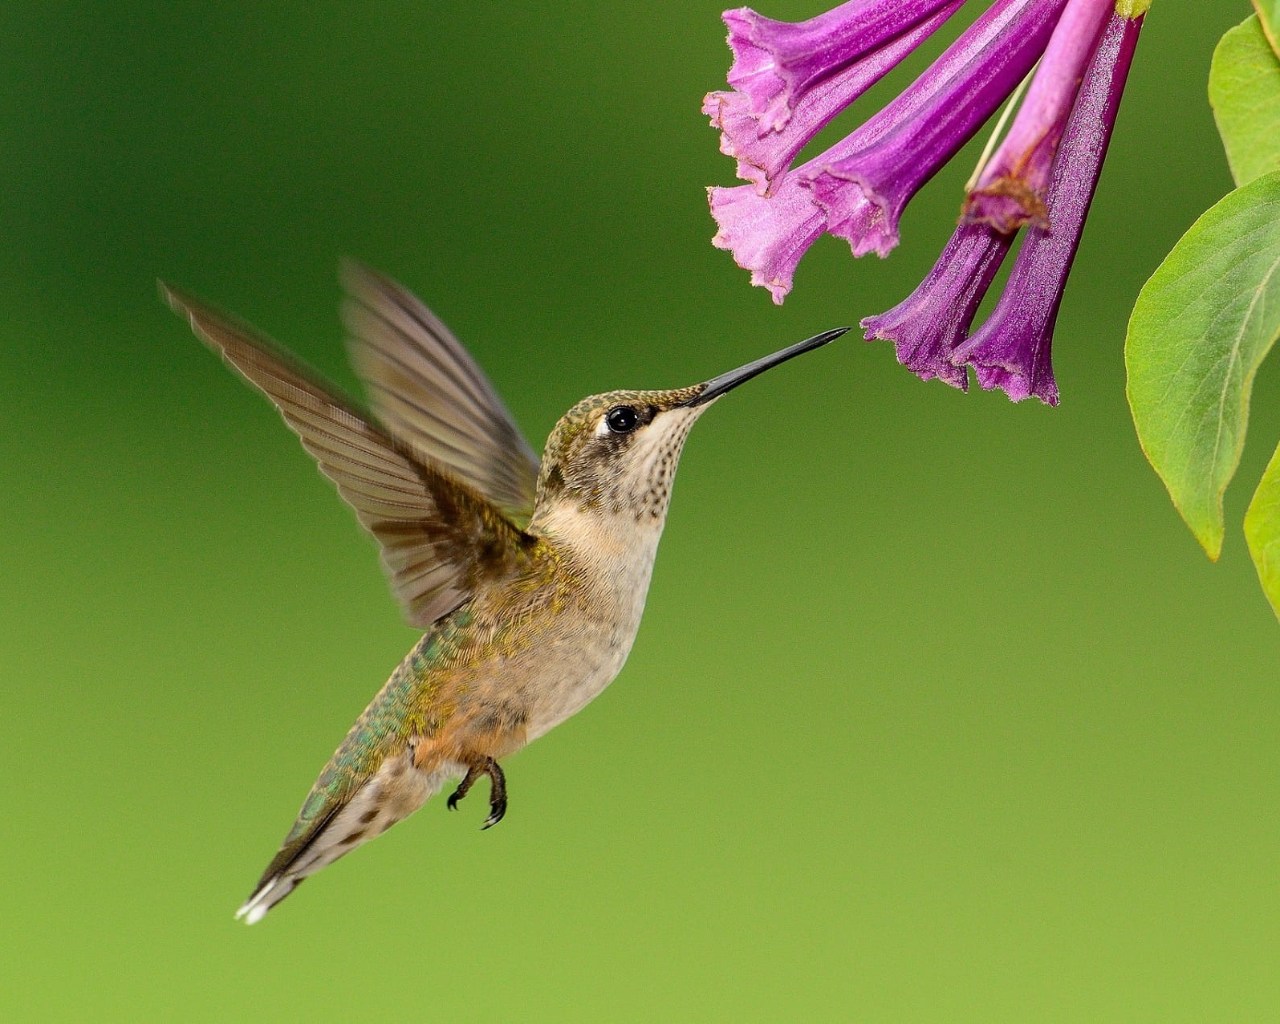 The Best Plants for Attracting Hummingbirds in Texas